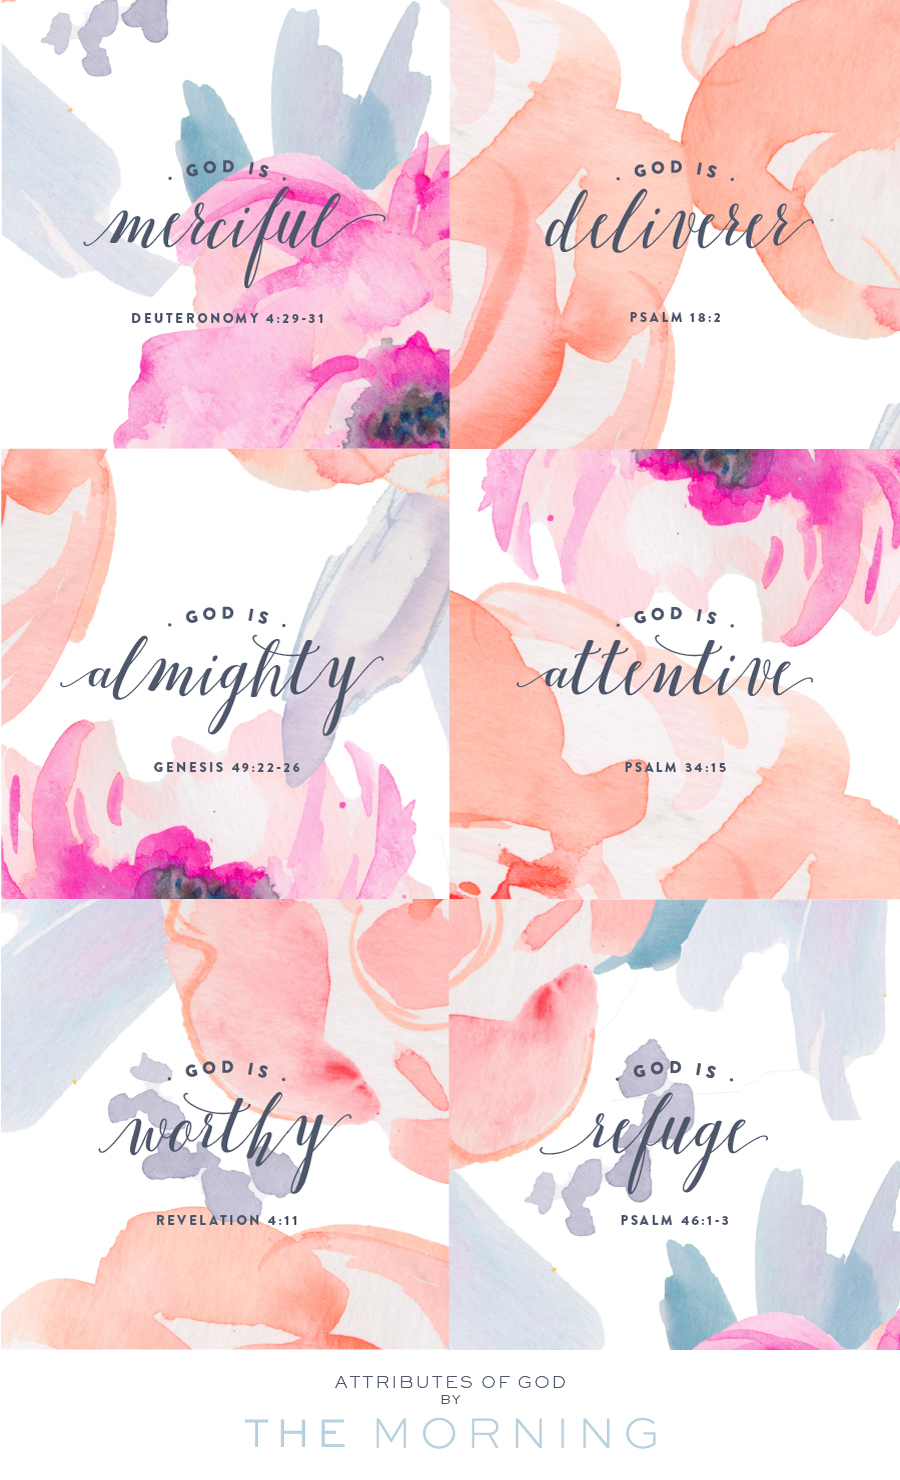 True Hope Amidst Suffering | God's Attributes Printable Infant & Pregnancy Loss | The Morning by Ashlee Proffitt